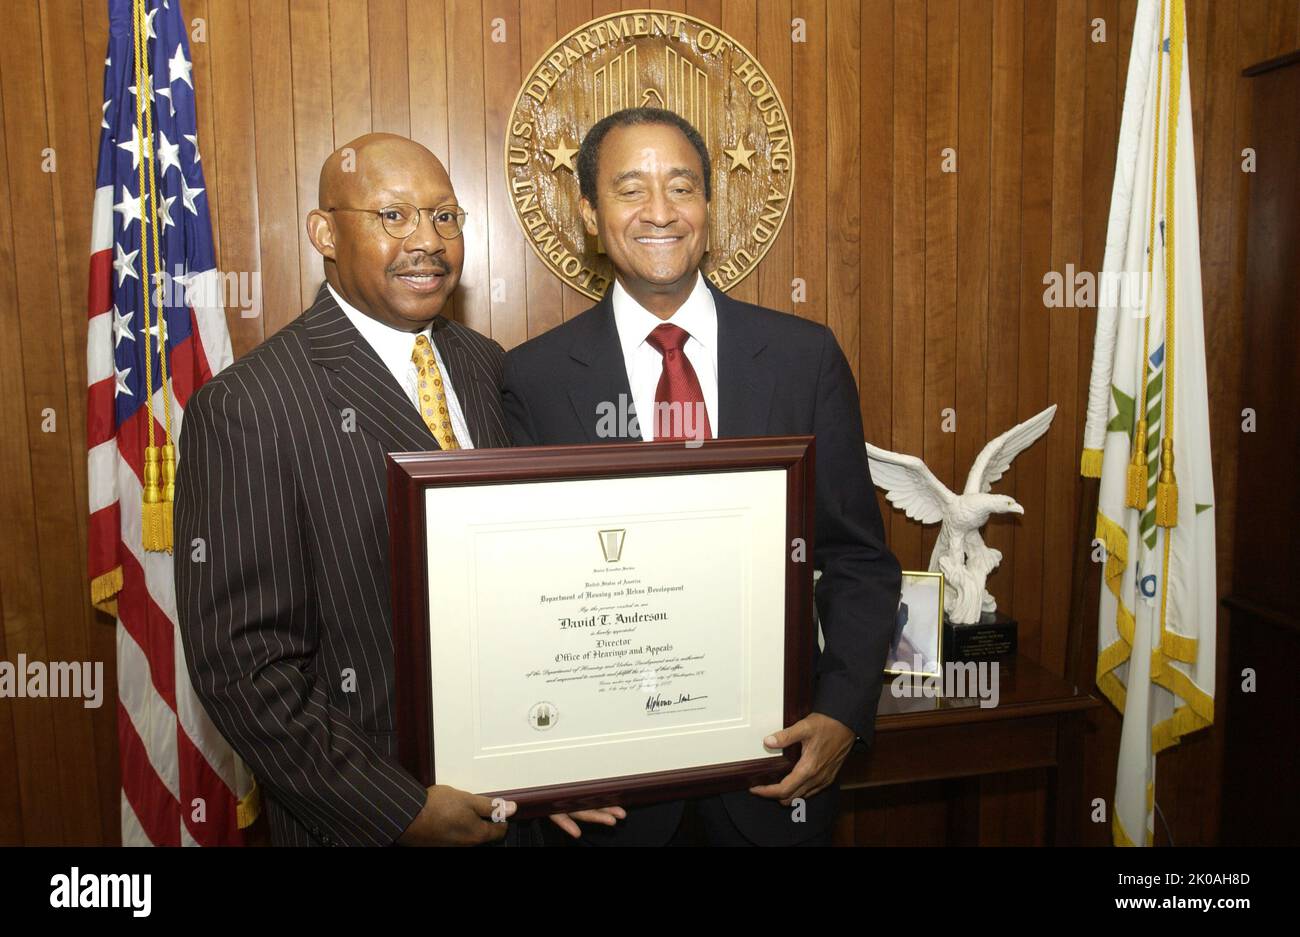 Secretary Alphonso Jackson with David Anderson - Judge David Anderson, newly-appointed Director of the Office of Hearings and Appeals, visiting Secretary's office for meeting with, and receipt of appointment certificate from, Secretary Alphonso Jackson at HUD Headquarters. Secretary Alphonso Jackson with David Anderson Subject, Judge David Anderson, newly-appointed Director of the Office of Hearings and Appeals, visiting Secretary's office for meeting with, and receipt of appointment certificate from, Secretary Alphonso Jackson at HUD Headquarters. Stock Photo